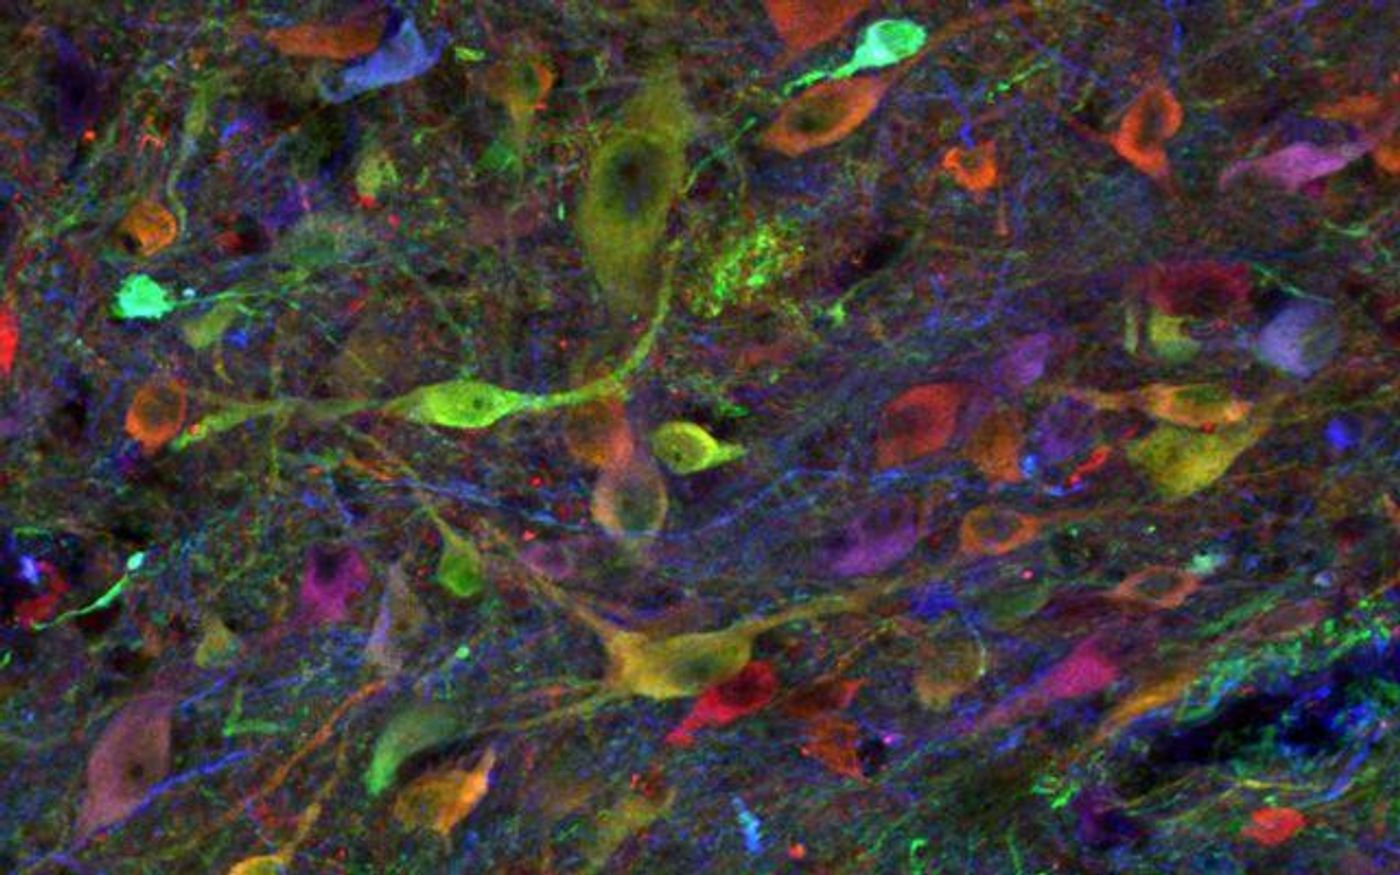 A population of induced pluripotent stem cell-derived neurons. Credit: UC San Diego Health